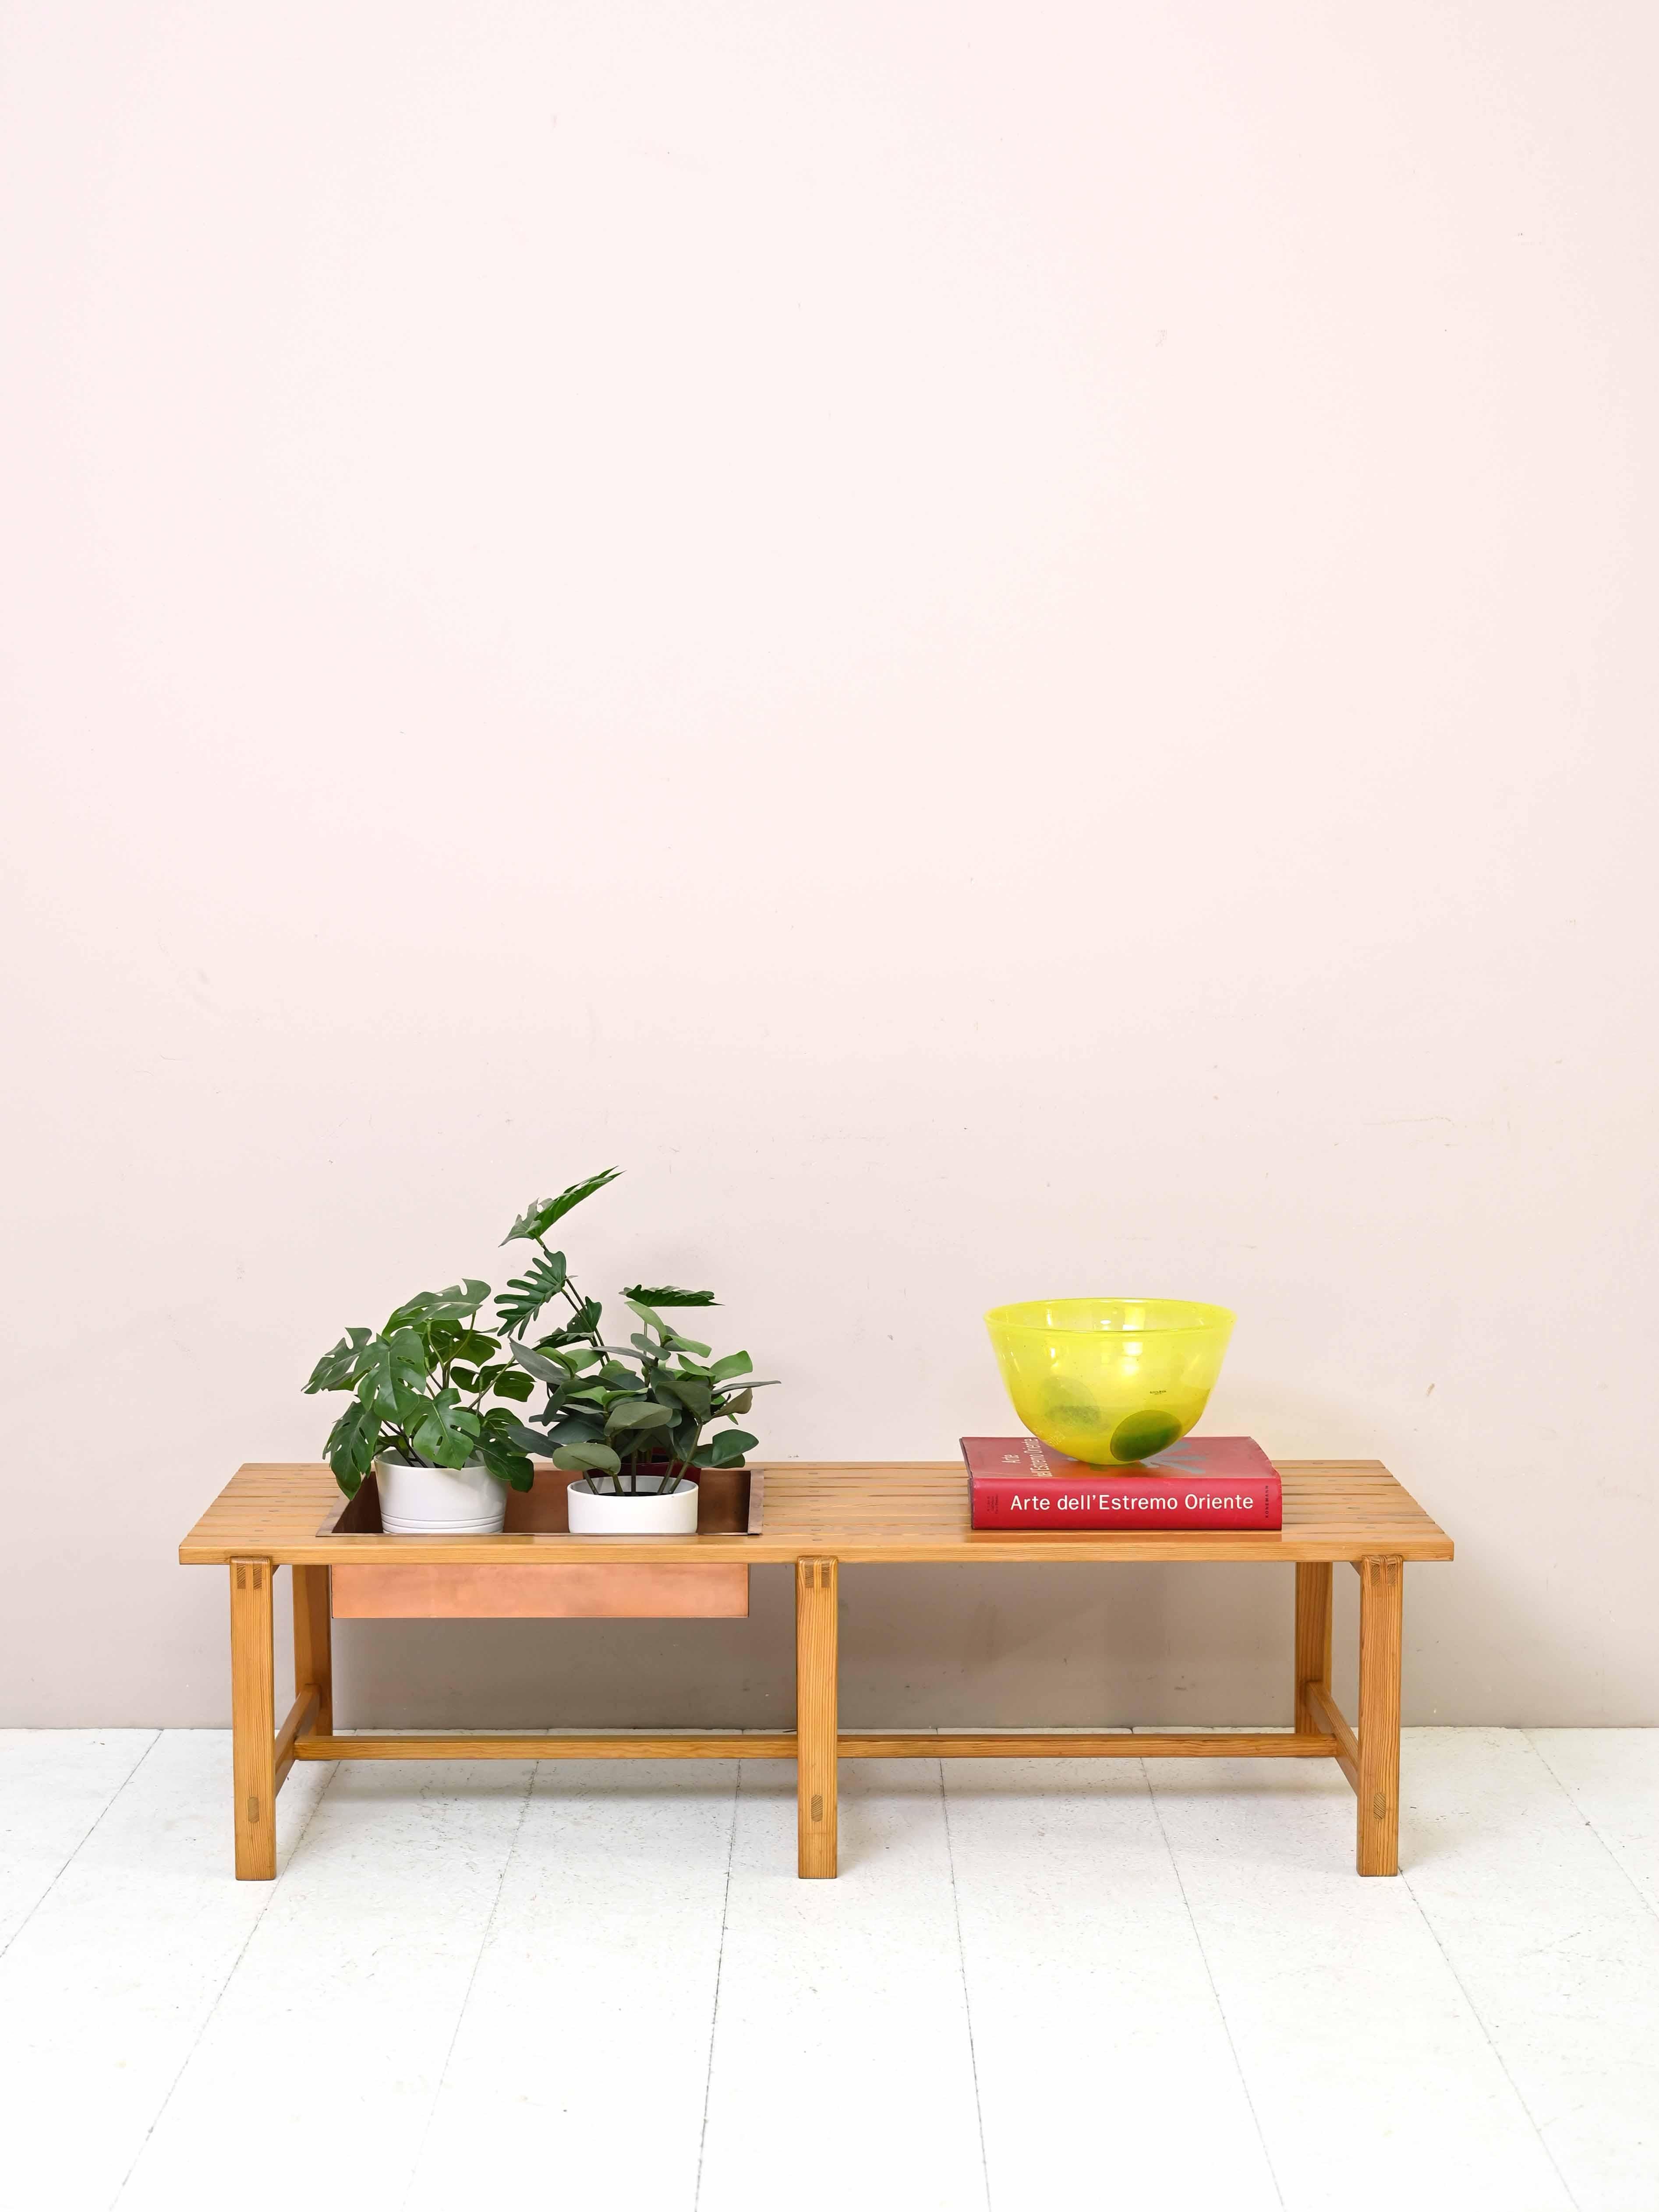 Vintage 1960s wood and metal bench.

A distinctive and typically Nordic design piece, this pine wood indoor bench has a dedicated metal planter space where plants and flowers can be placed.
Ideal to place under a window to recreate a relaxing